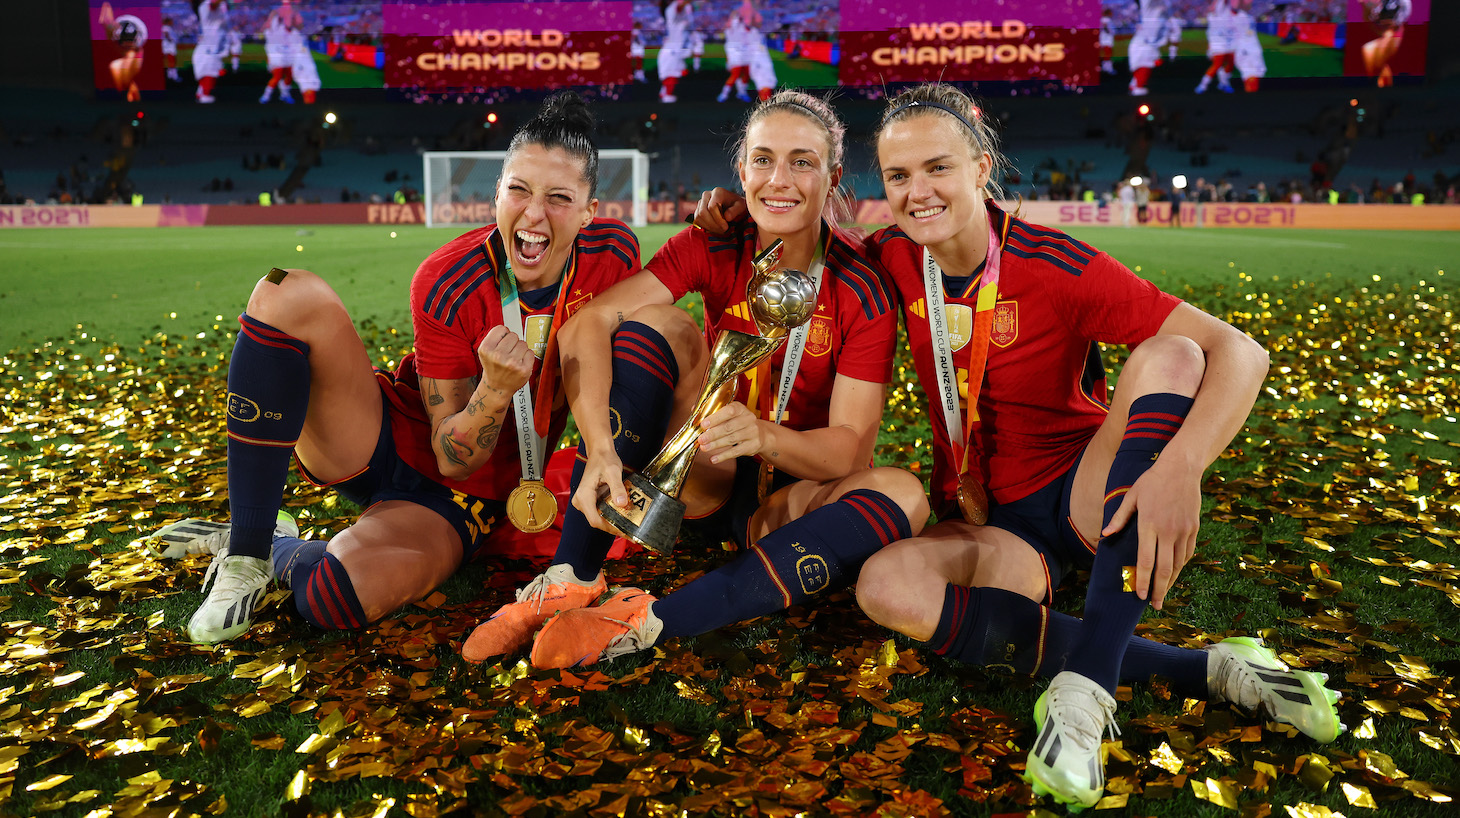 Jennifer Hermoso, Alexia Putellas and Irene Paredes of Spain celebrate with the FIFA Women's World Cup Trophy after the team's victory in the FIFA Women's World Cup Australia &amp; New Zealand 2023 Final match between Spain and England at Stadium Australia on August 20, 2023 in Sydney / Gadigal, Australia.